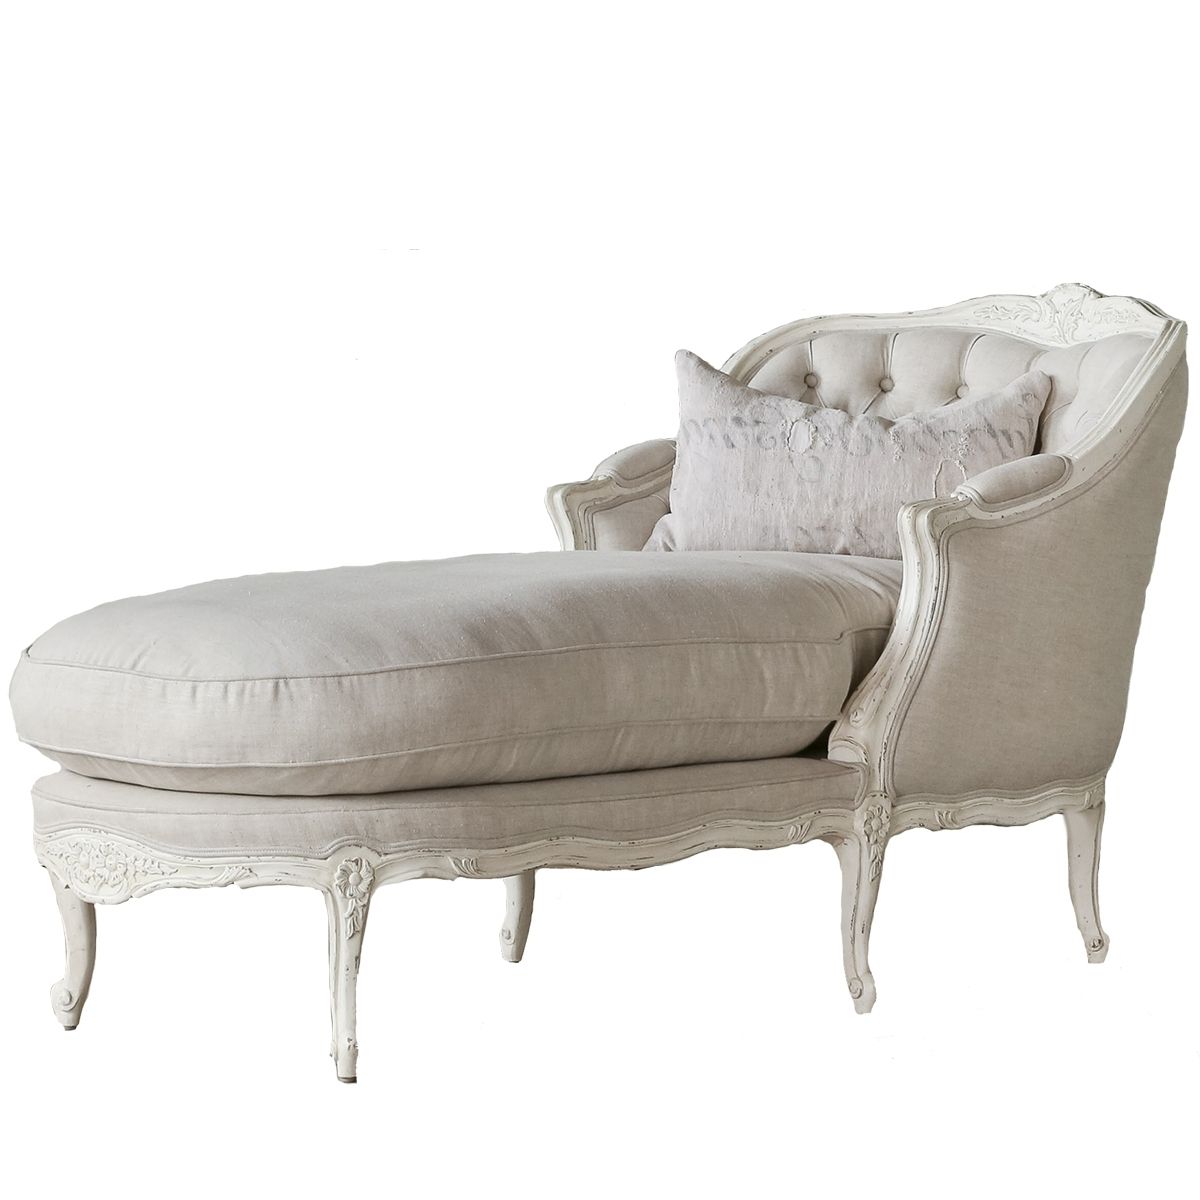 Sumptuous French Chaise Lounge – Shabby Chic For Fashionable French Chaises (View 5 of 15)